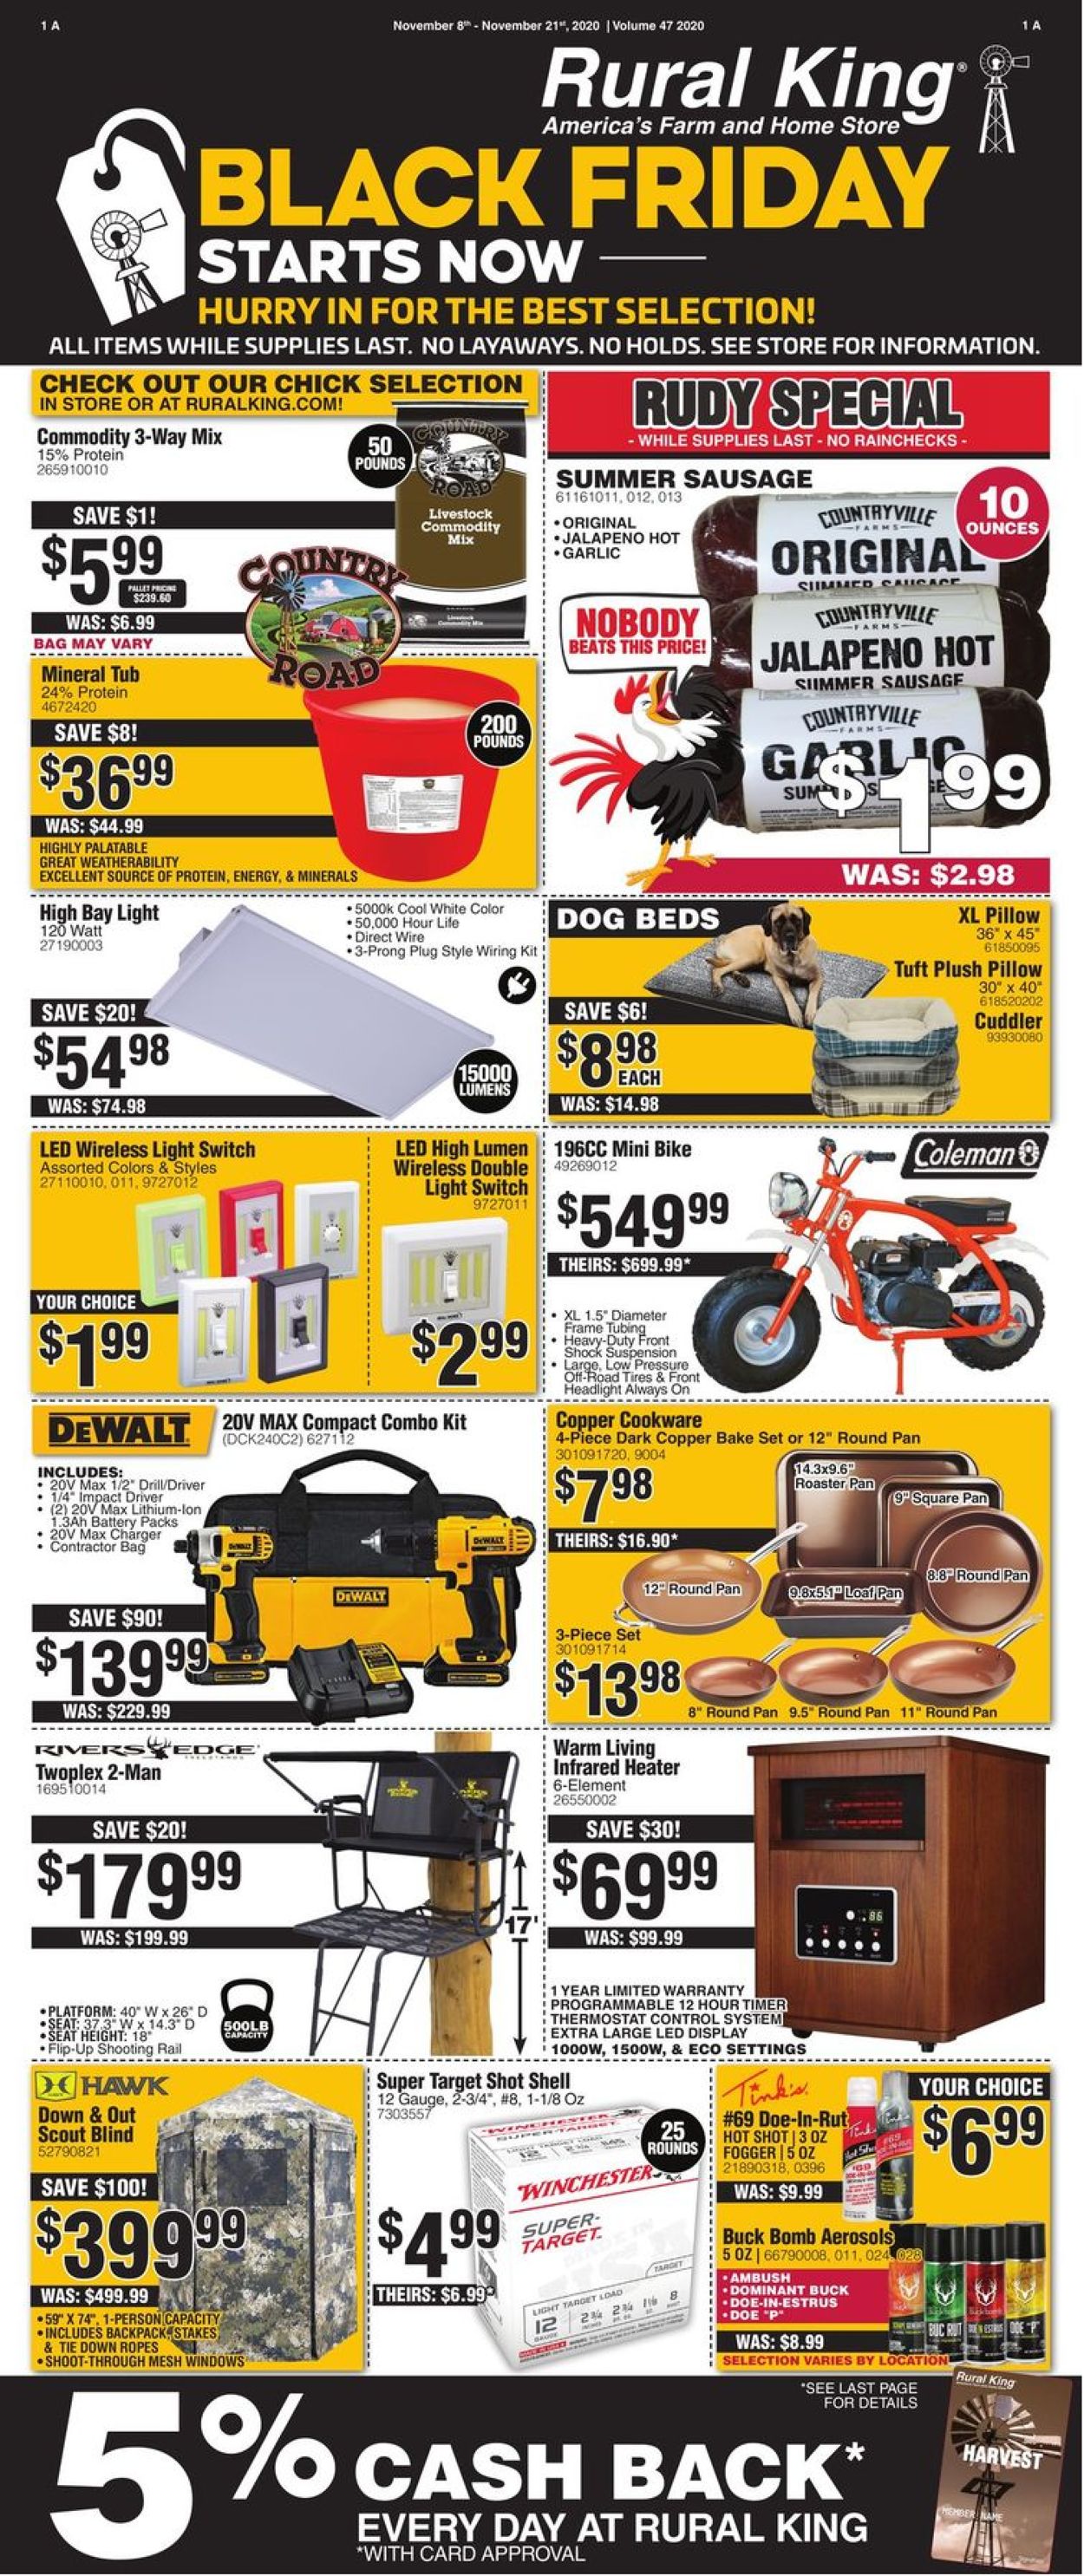 Rural King Black Friday 2020 Current weekly ad 11/08 11/21/2020